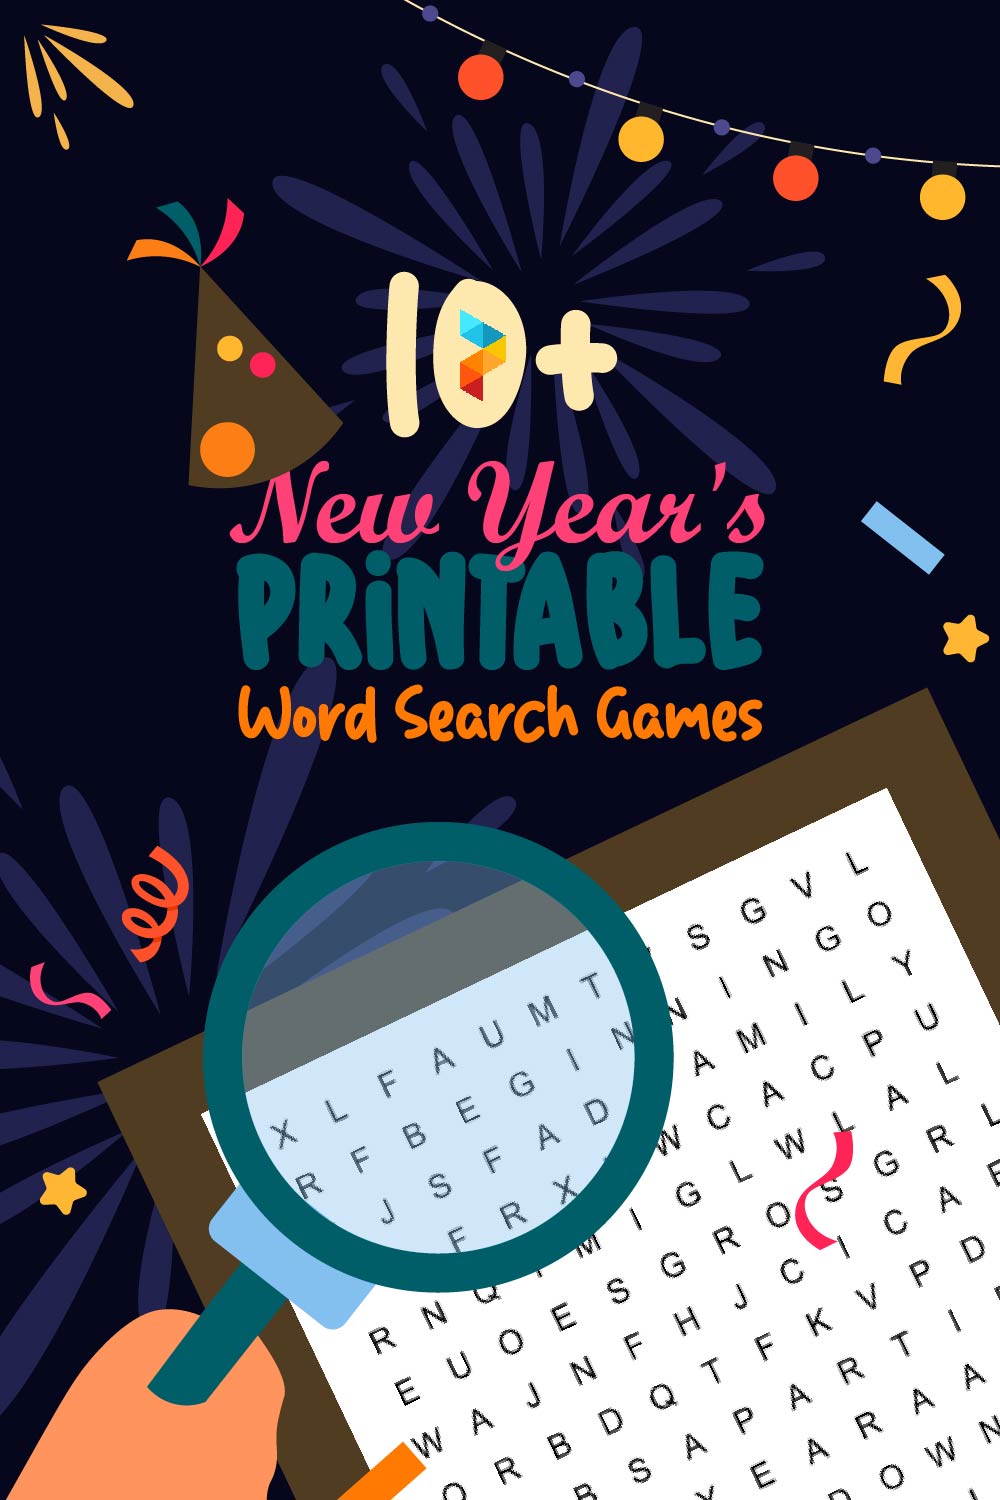 New Year's Printable Word Search Games